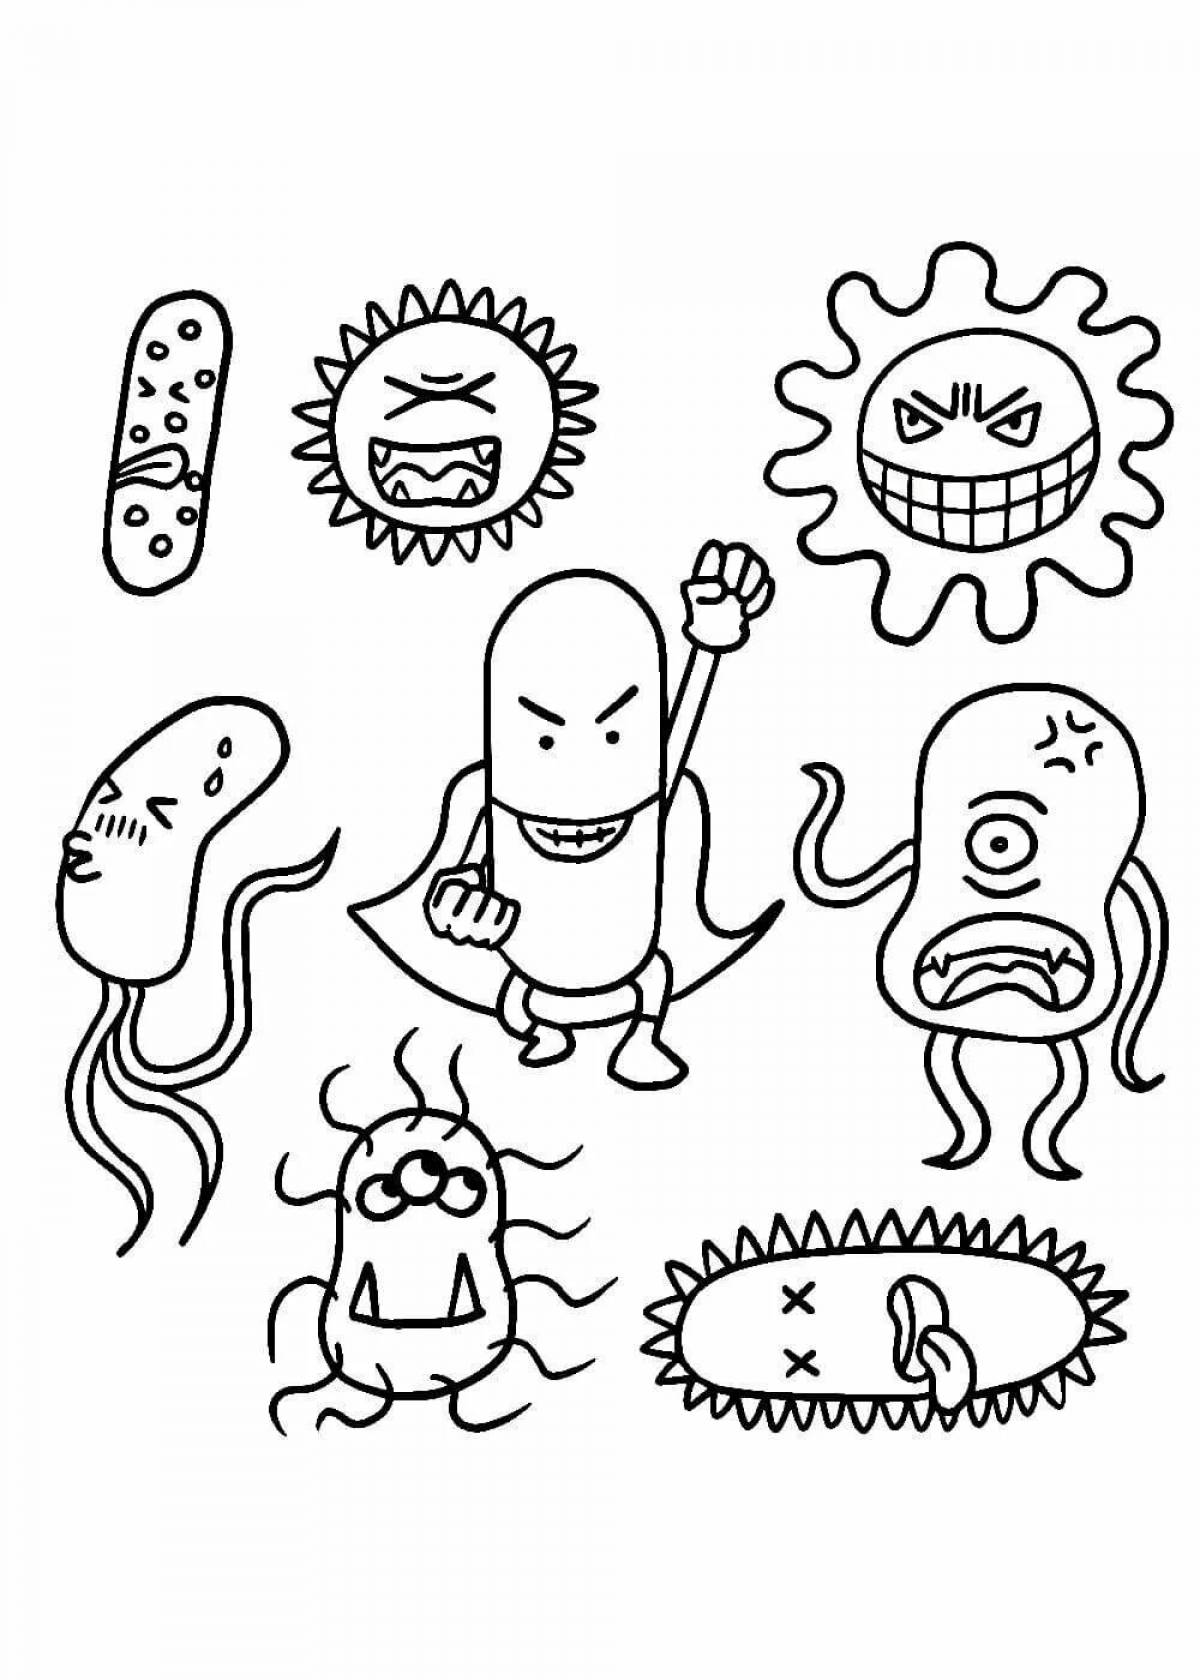 Viruses and germs for kids #3